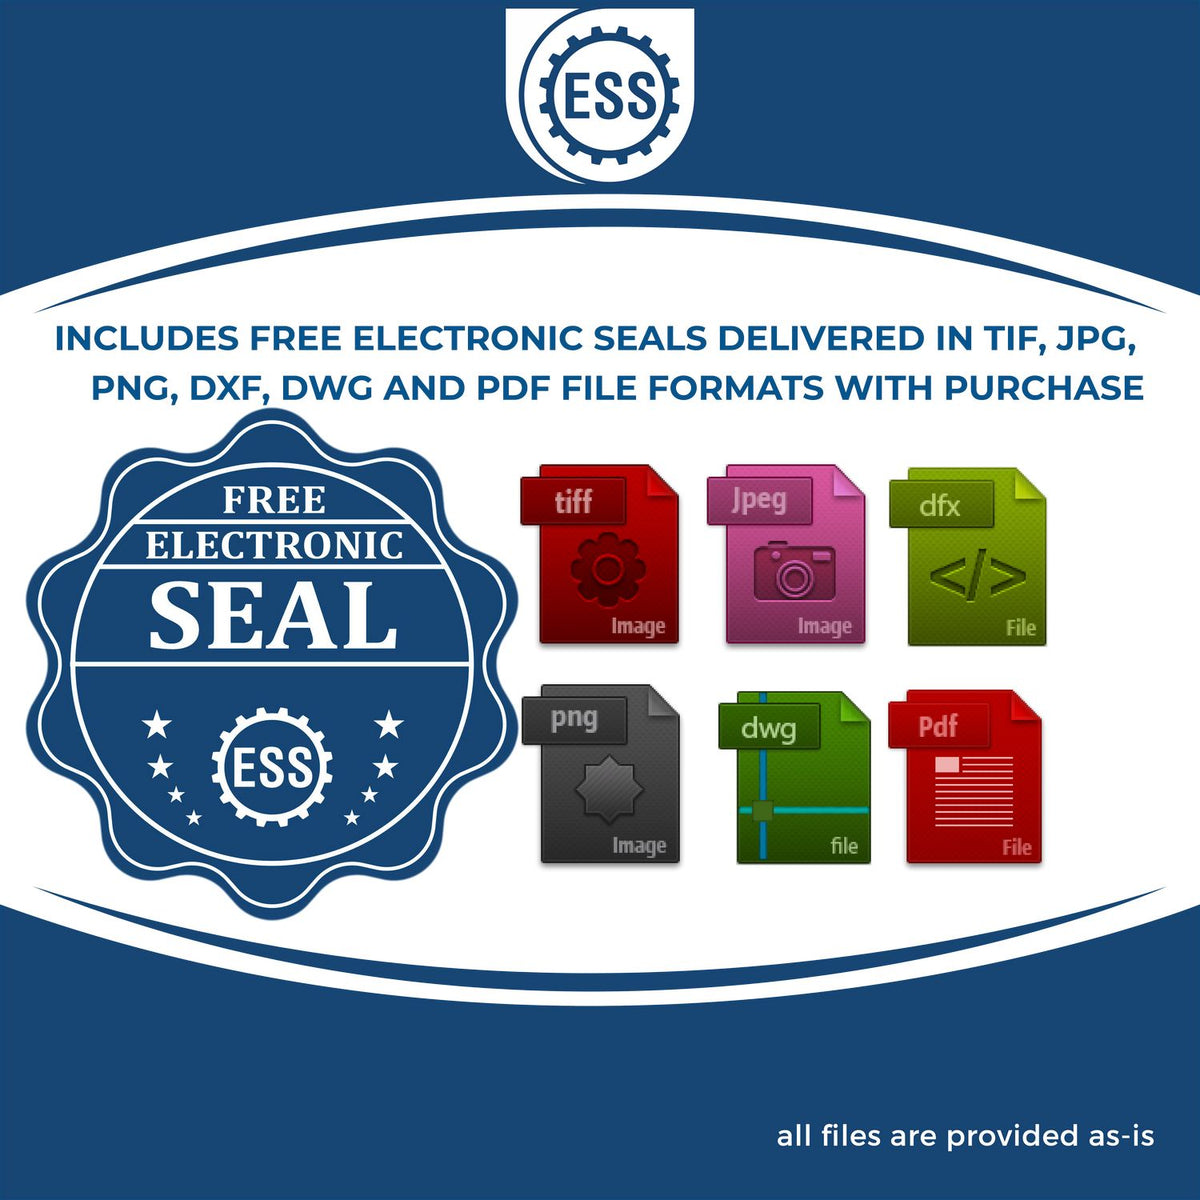 An infographic for the free electronic seal for the State of New York Extended Long Reach Engineer Seal illustrating the different file type icons such as DXF, DWG, TIF, JPG and PNG.